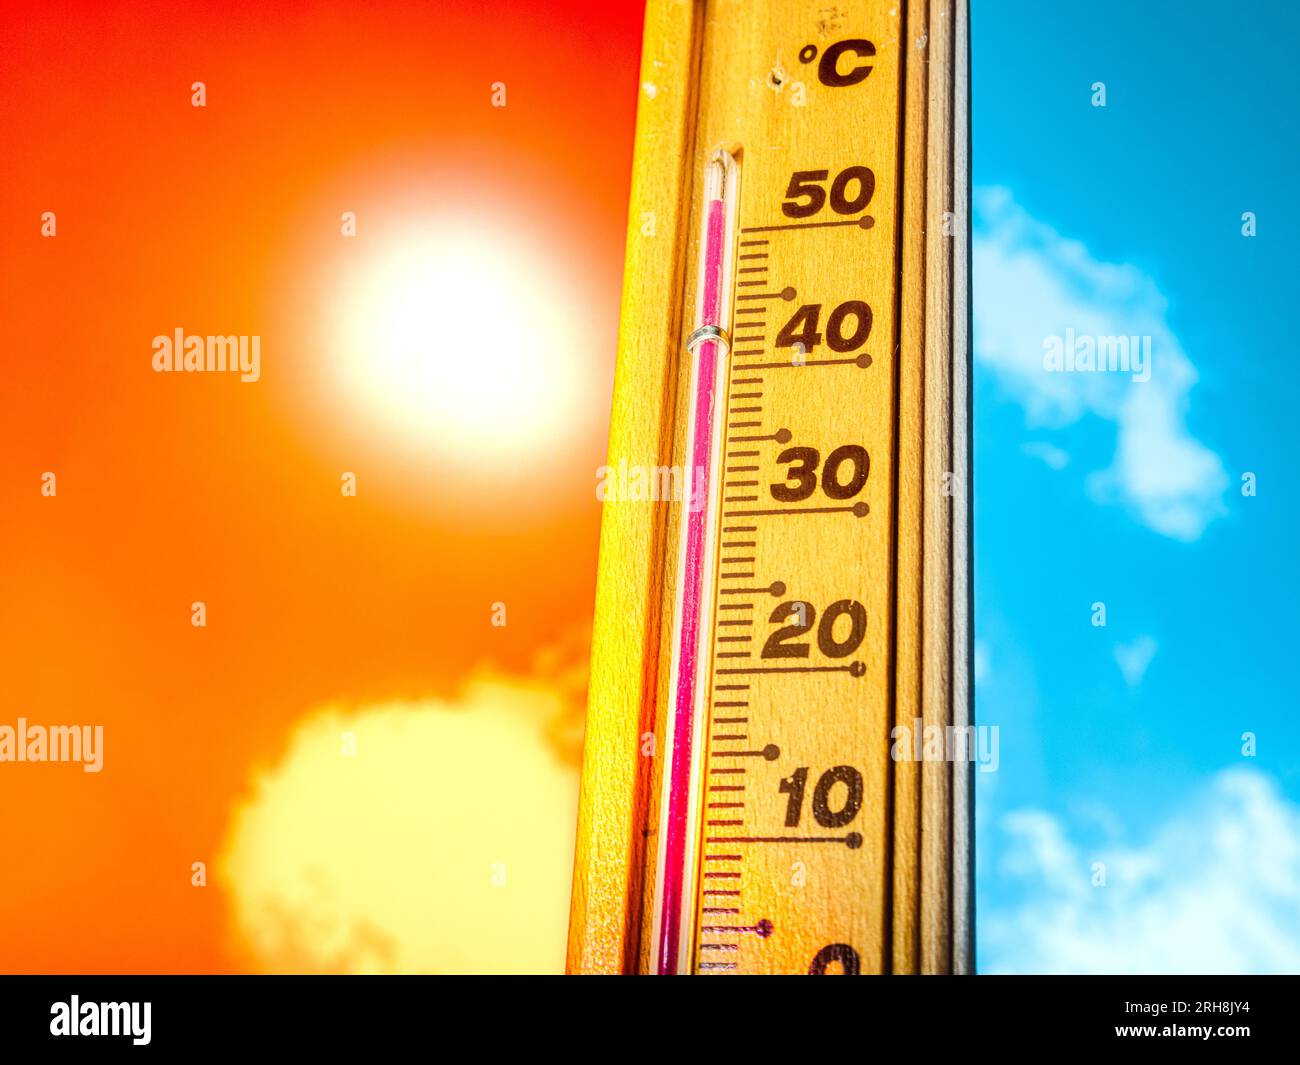 A hot summer day, with the thermometer showing a high heatwave temperature of 50 degrees Celsius. Global climate change, extreme weather, red alarm. Stock Photo